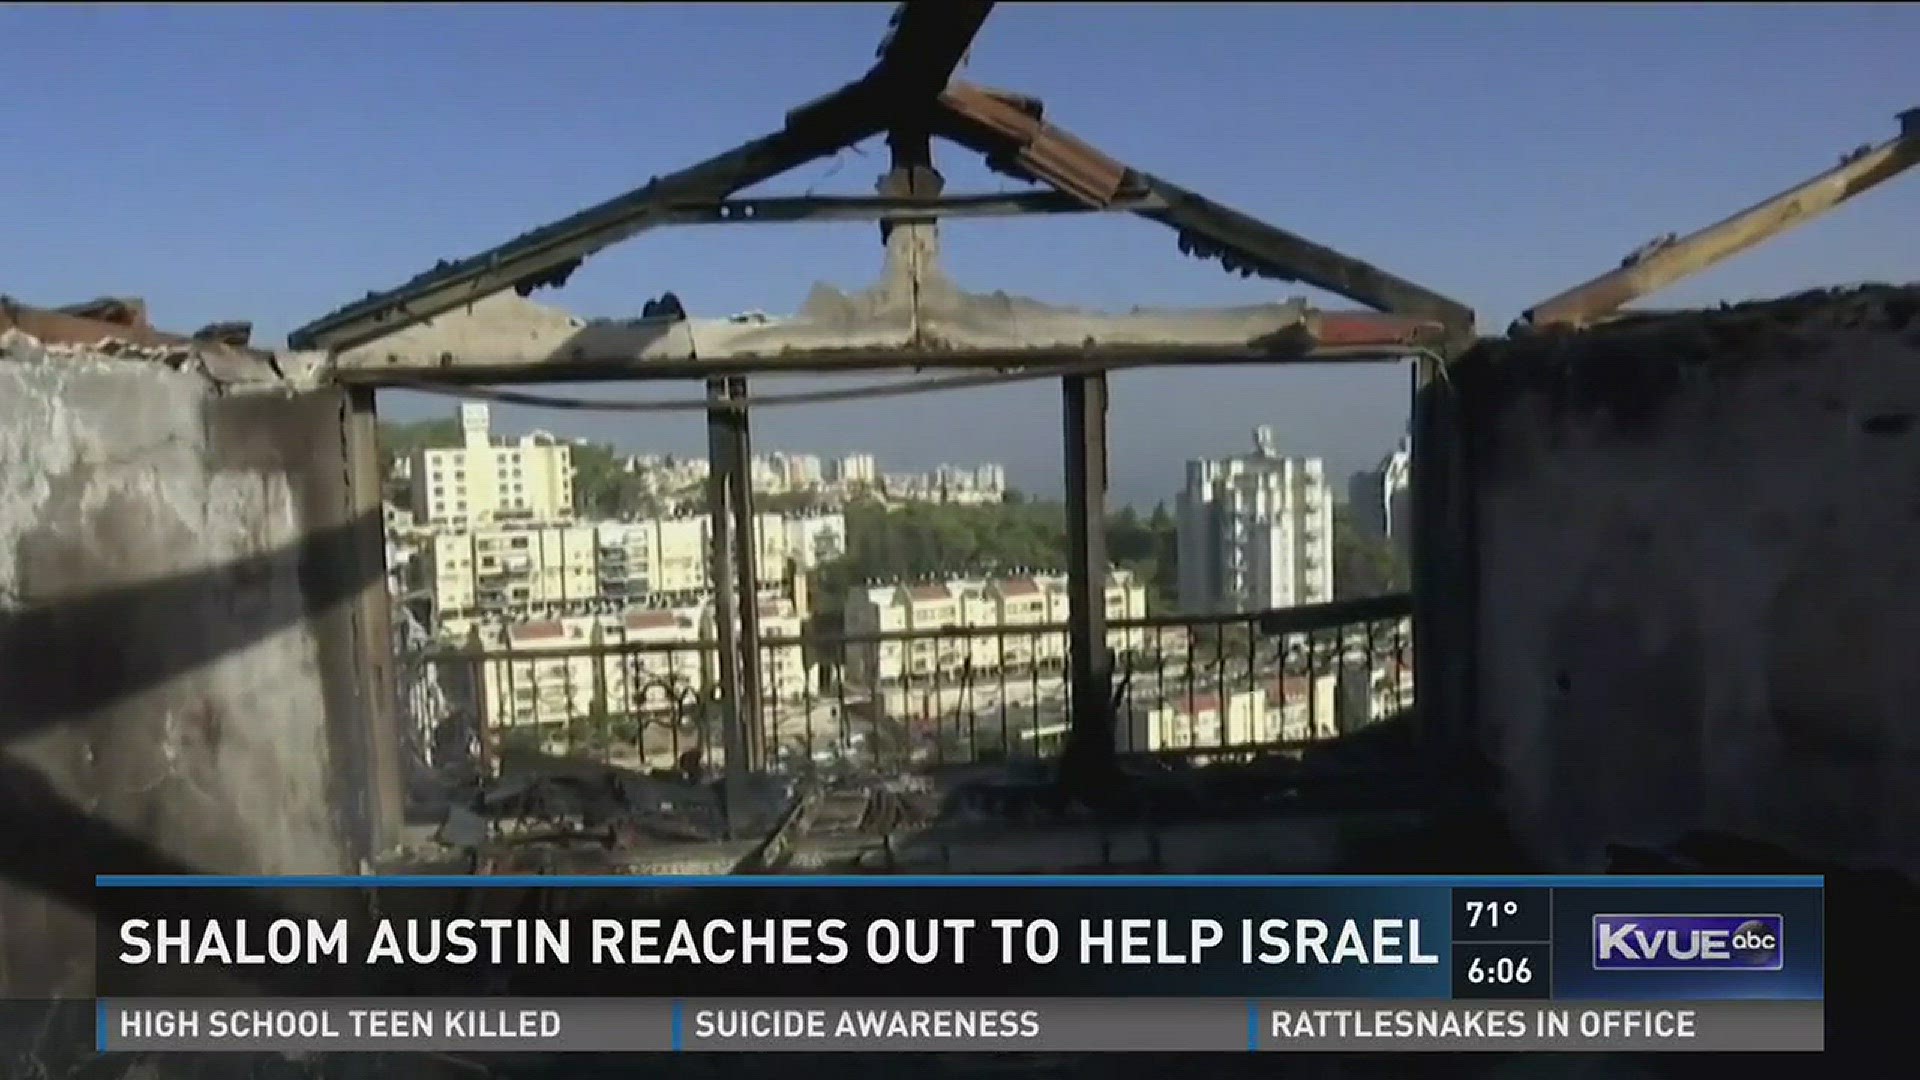 Shalom Austin reaches out to help Israel